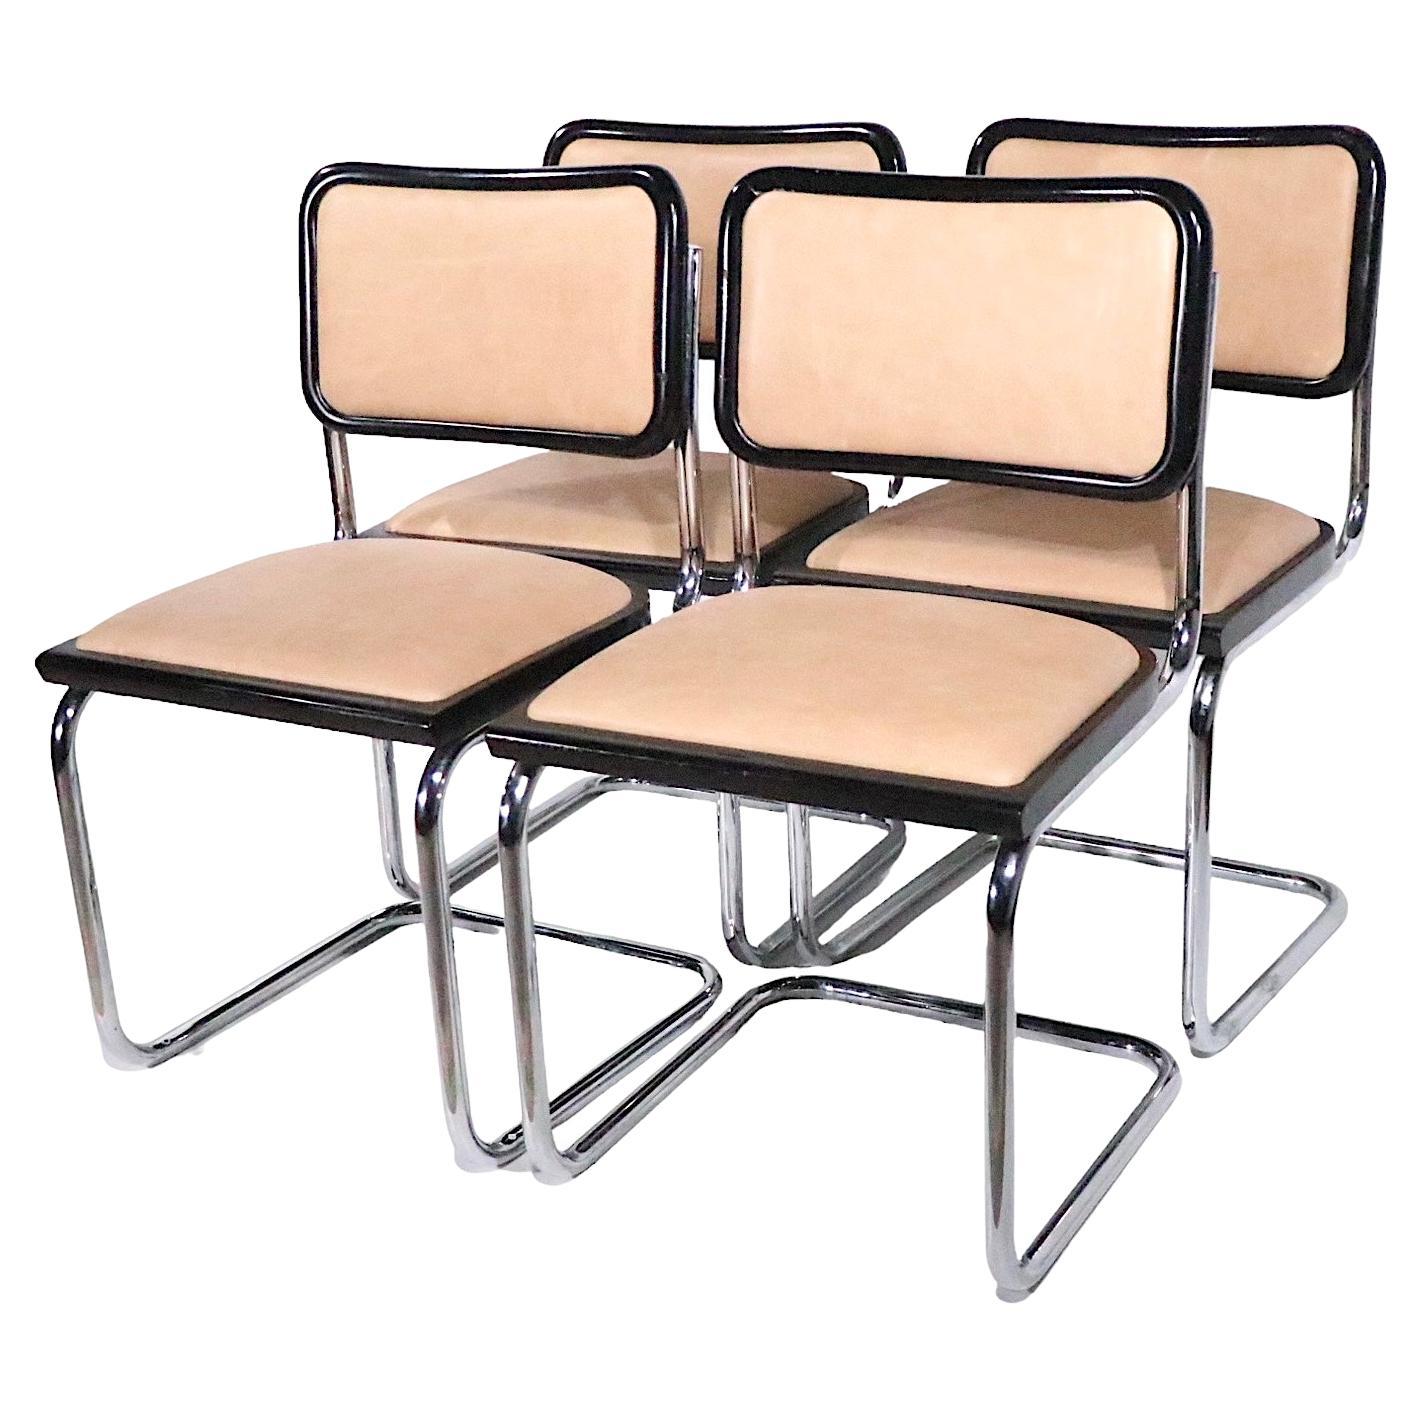 Set of Four Cesca Chairs Made in Italy Designed by Breuer c. 1970s